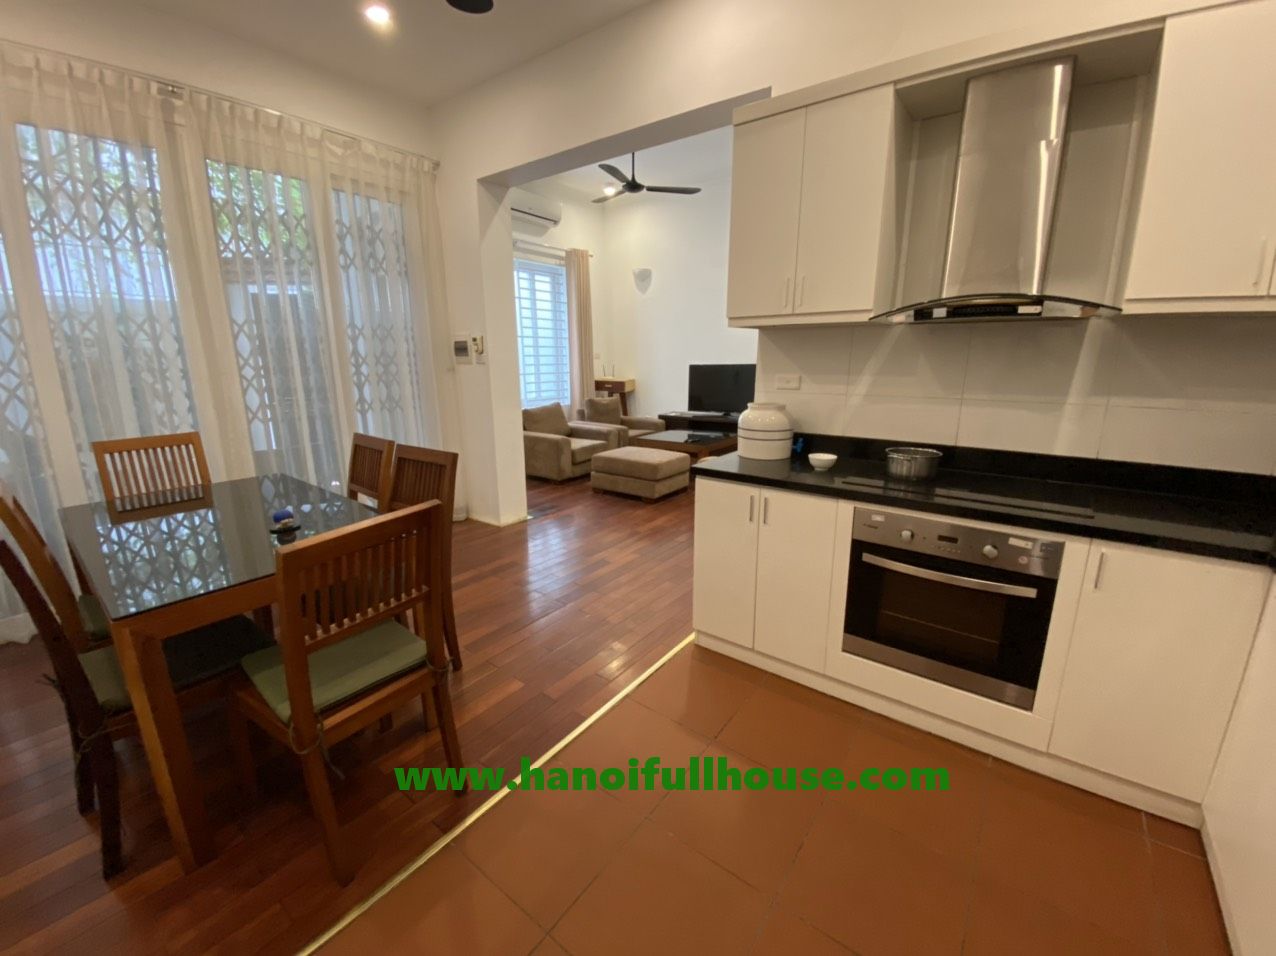 Lovely, quiet 3 bedroom house in the center of Tay Ho district